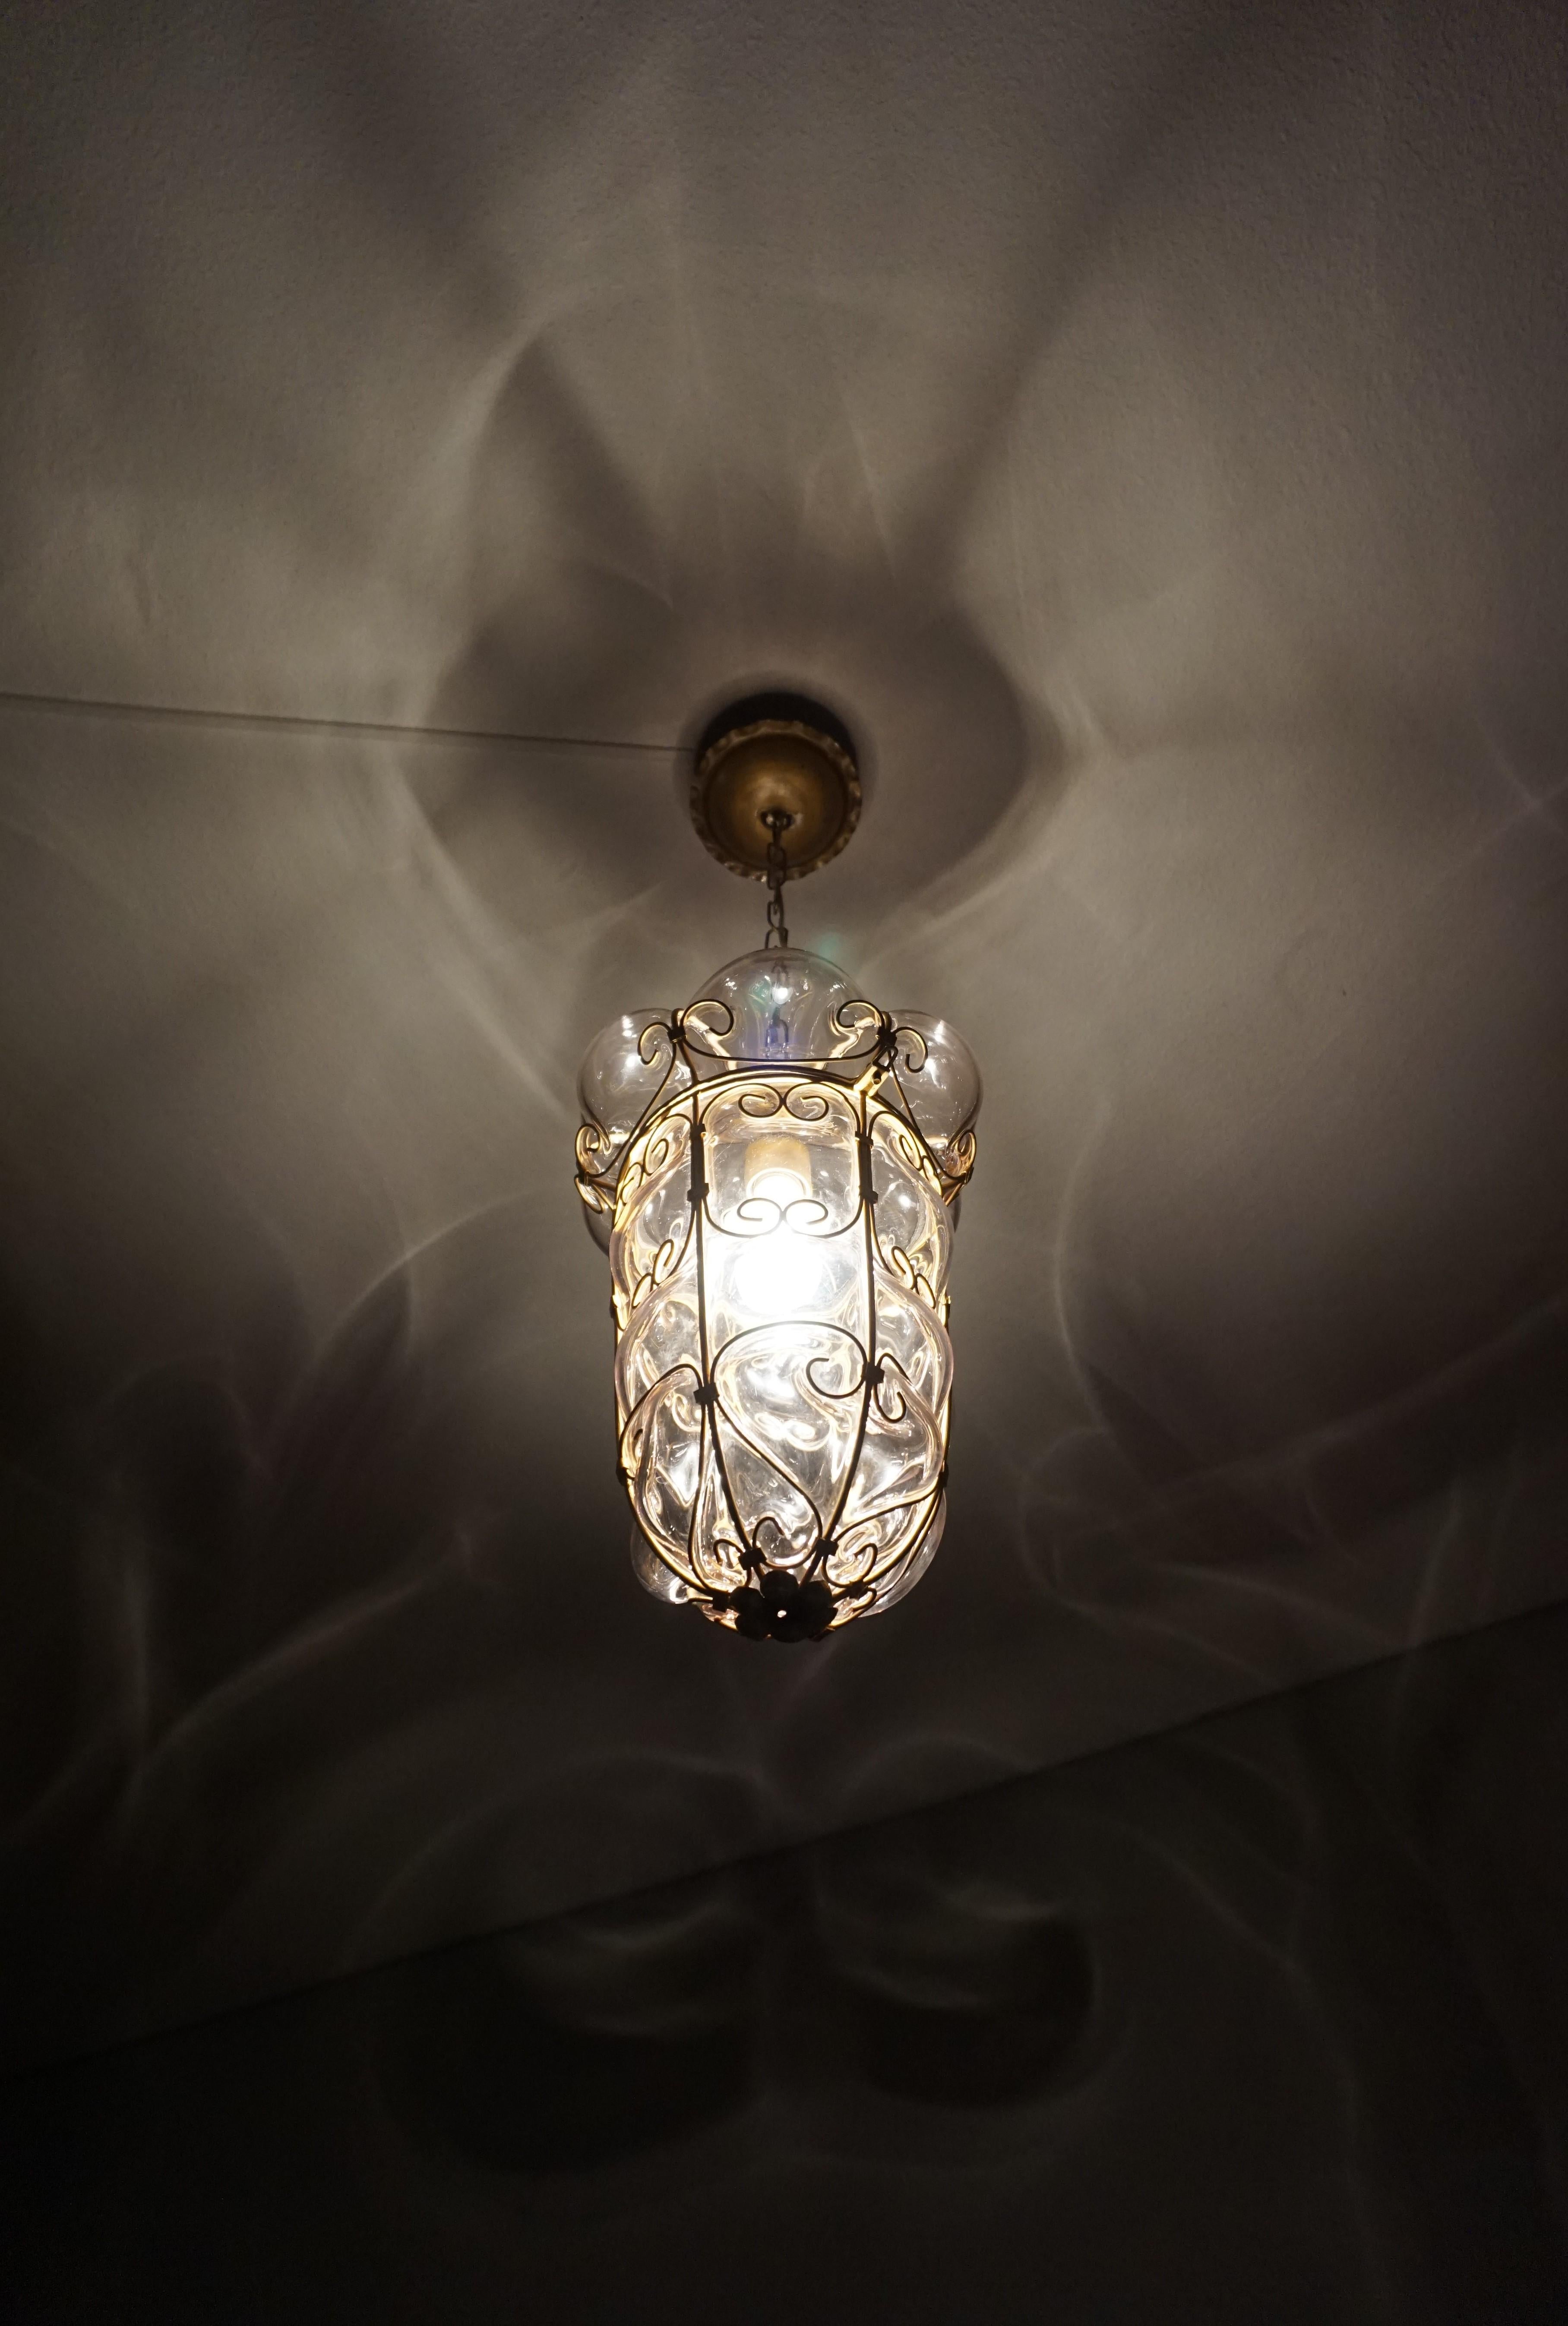 Marvelous shape, 1950s Venetian pendant with the original maker's mark.

This midcentury made, Italian light fixture is an absolute joy to look at, both on and off. With the light switched off, it is an Italian work of glass art on your ceiling and